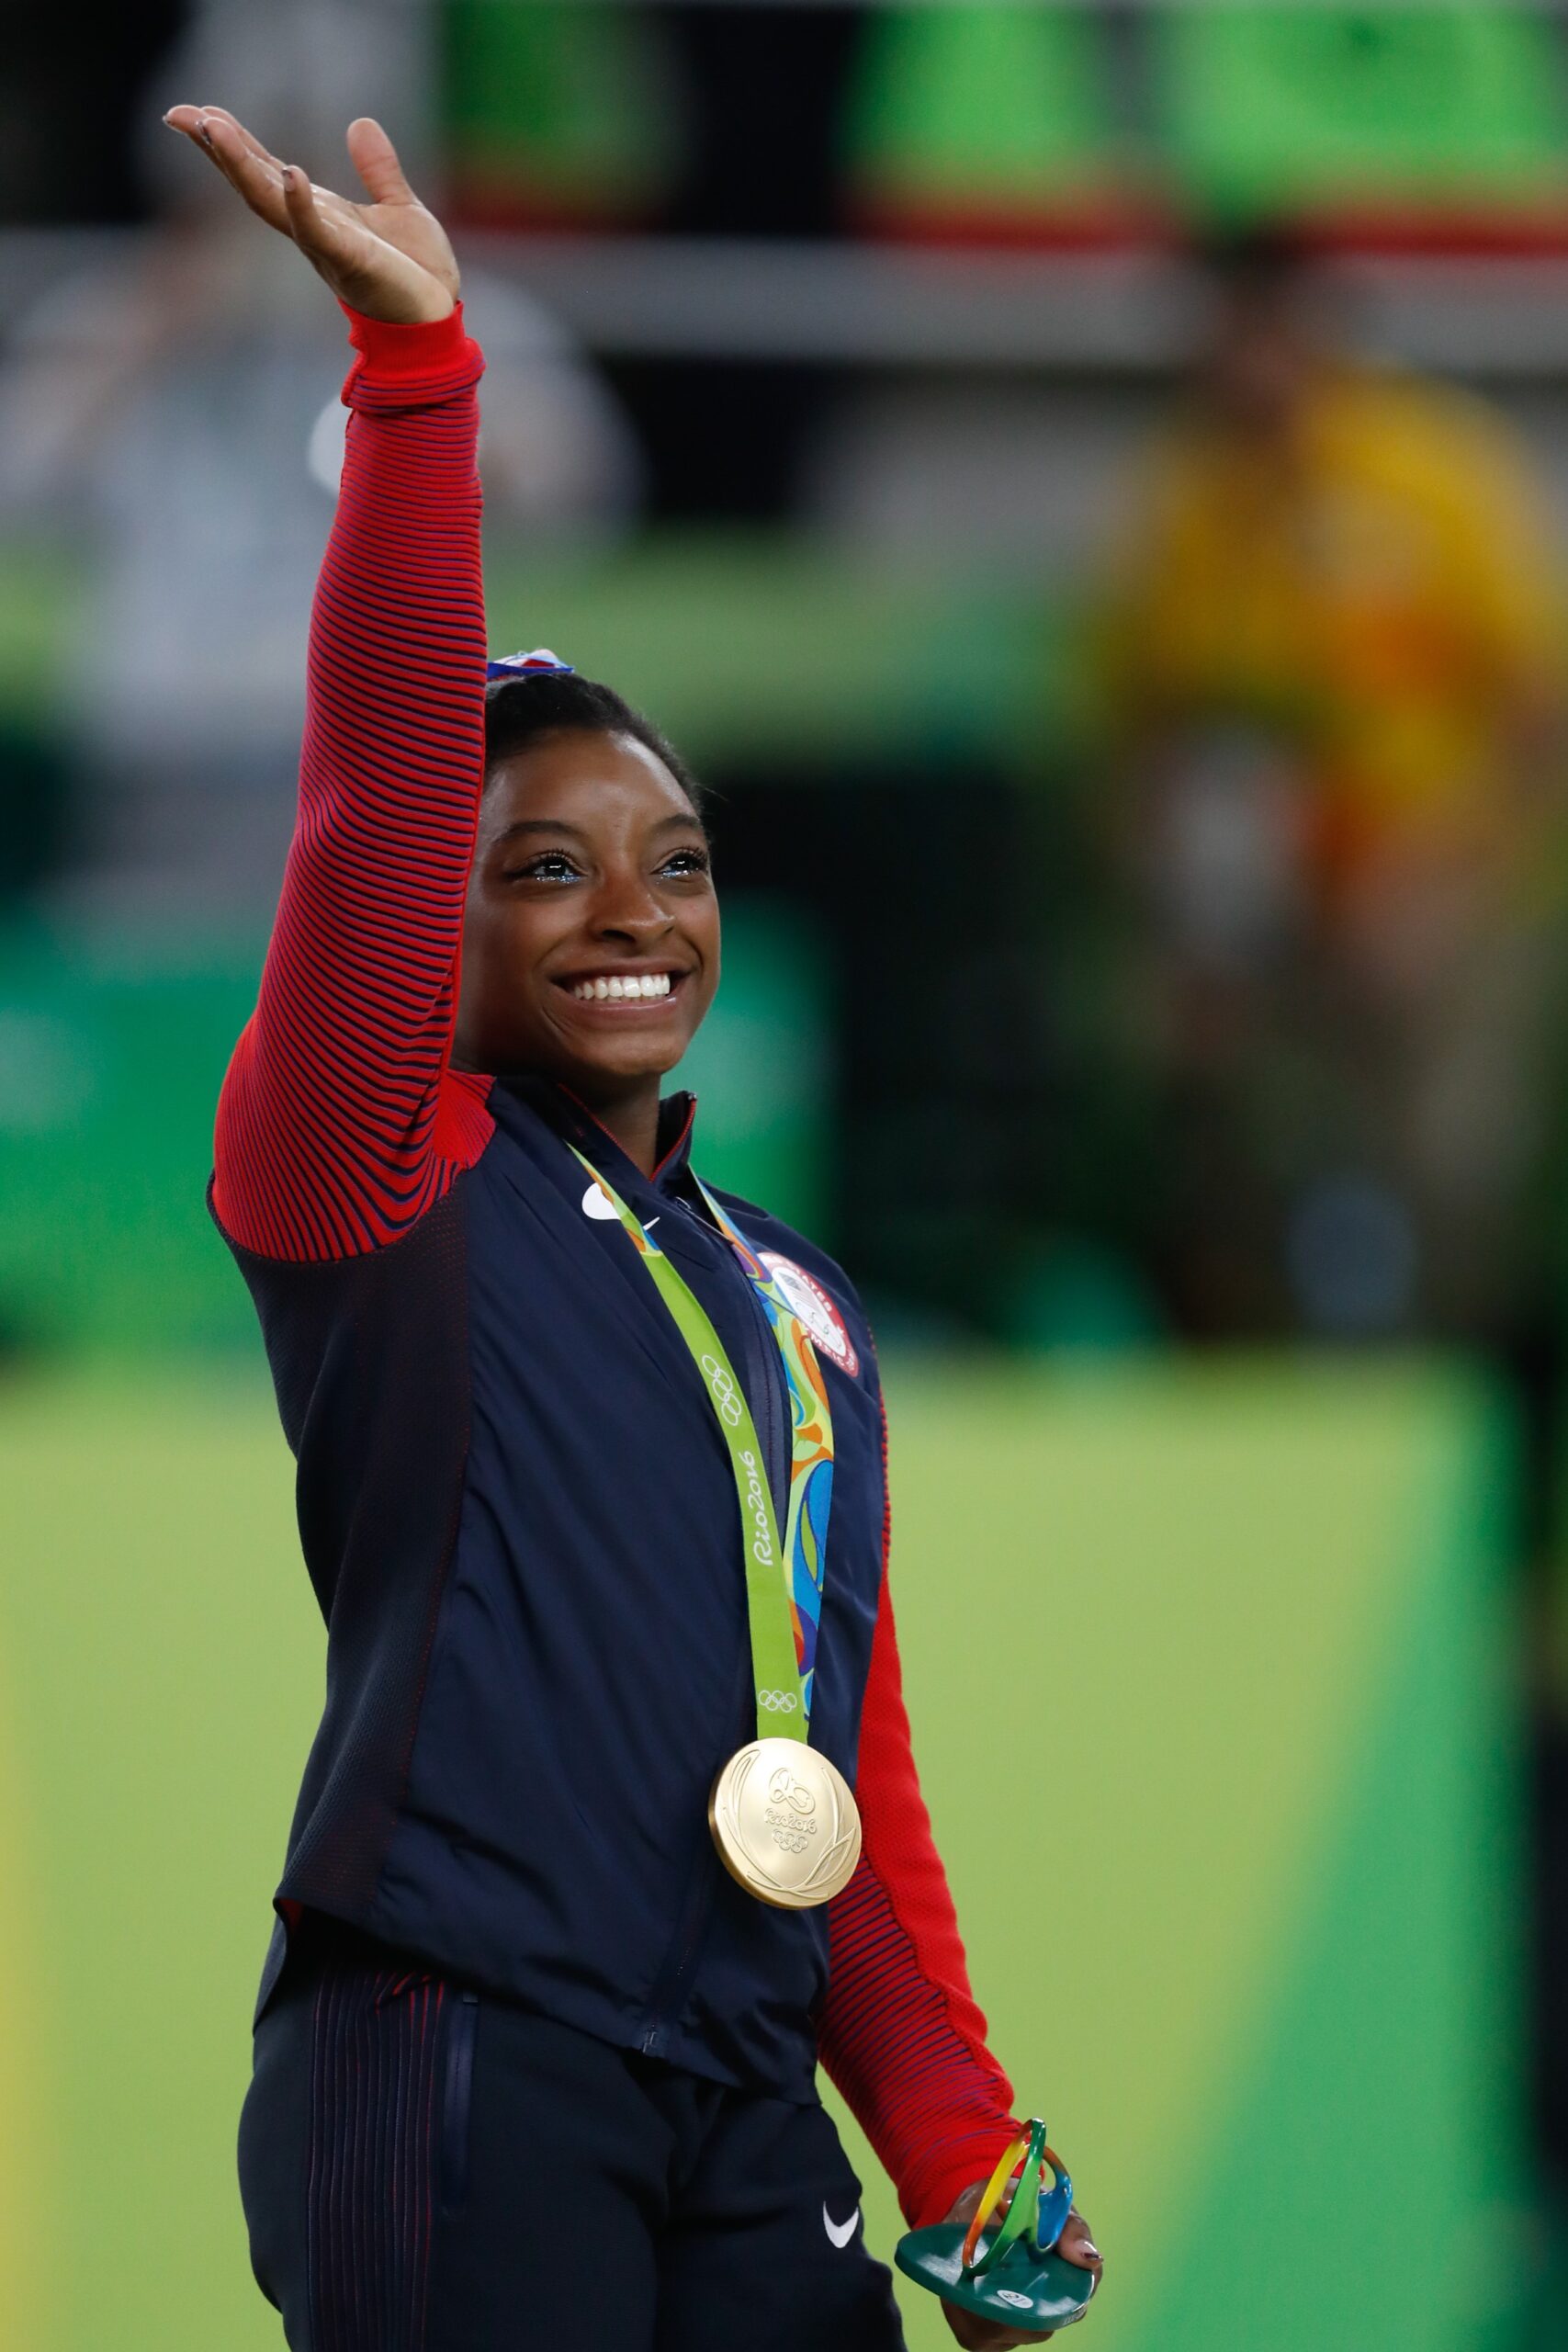 Olympian Simone Biles wears a gold medal and waves with her right hand while smiling